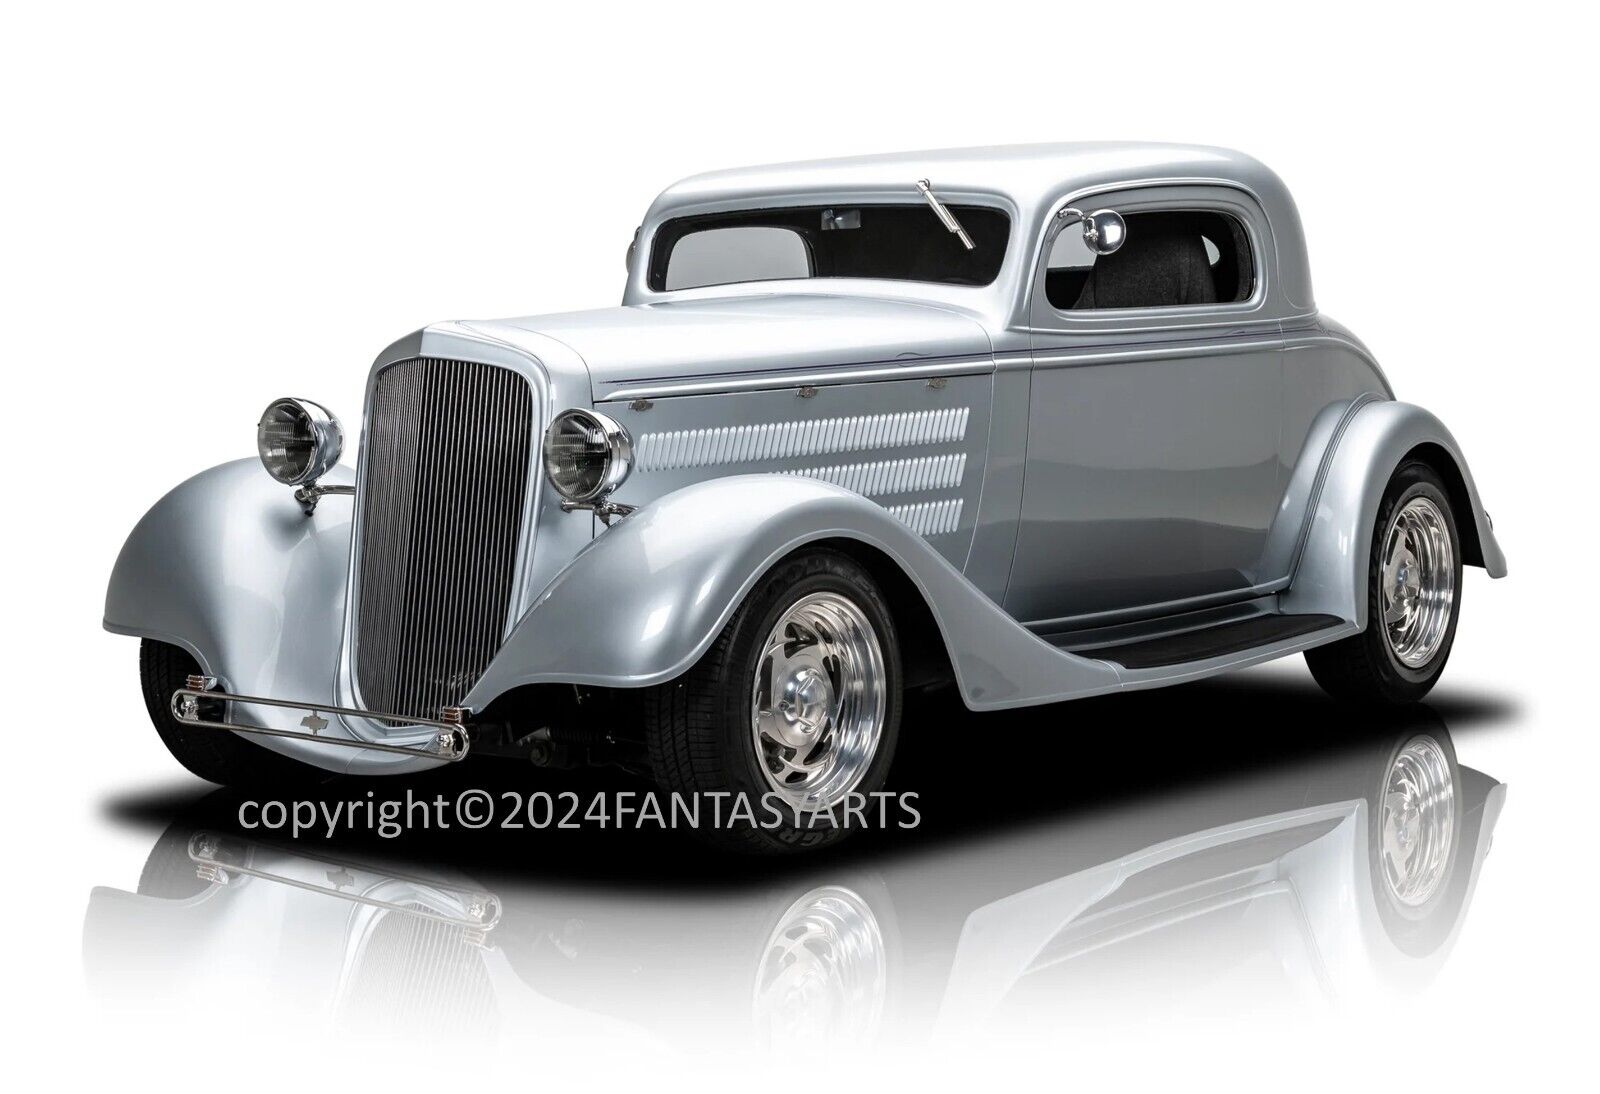 1934 Chevrolet 3-Window Coupe Large Poster sized Photo Print Wall Art 11\